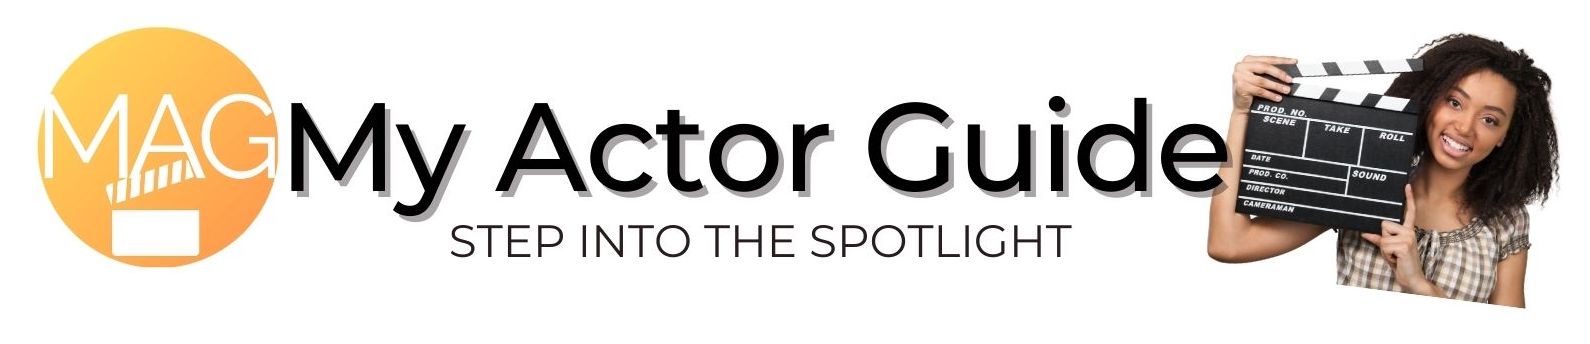 my-actor-guide-header-image